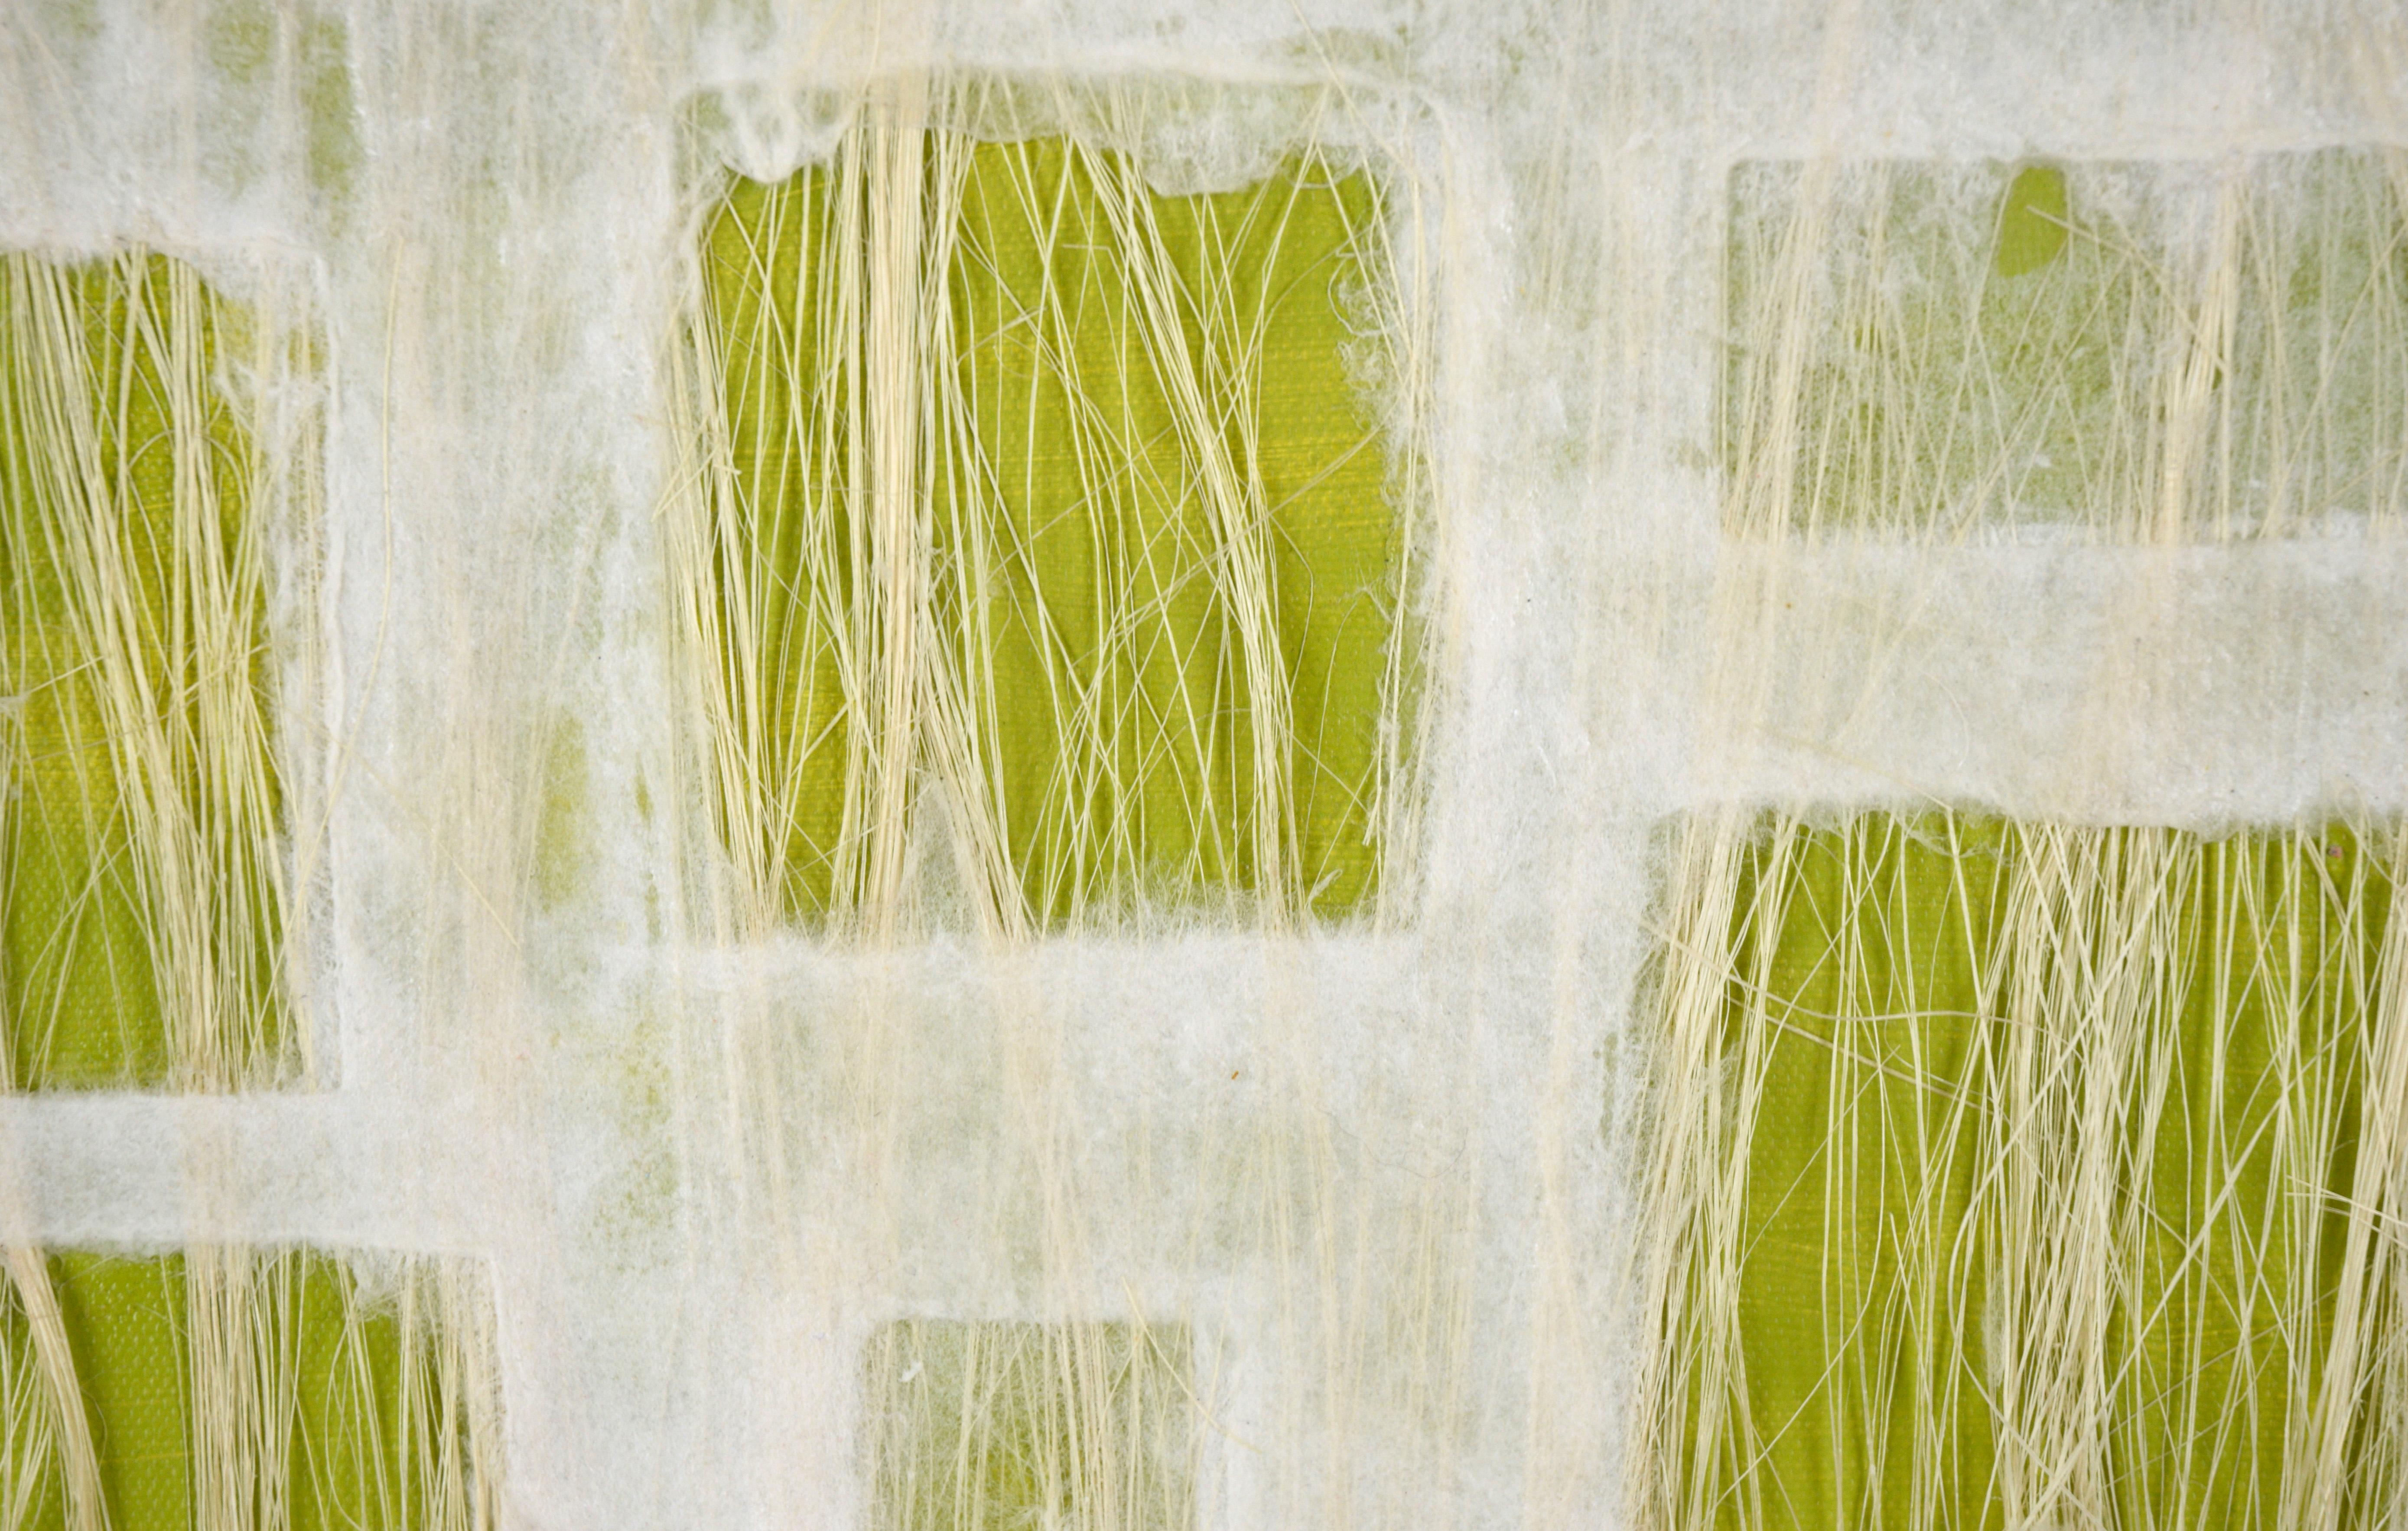 Abstract Geometric Composition with Handmade Paper, Fibers and Acrylic on Canvas

Whimsical abstract composition by an unknown artist (20th Century). Lime green acrylic paint makes up the background of this composition. Atop that, there is a layer